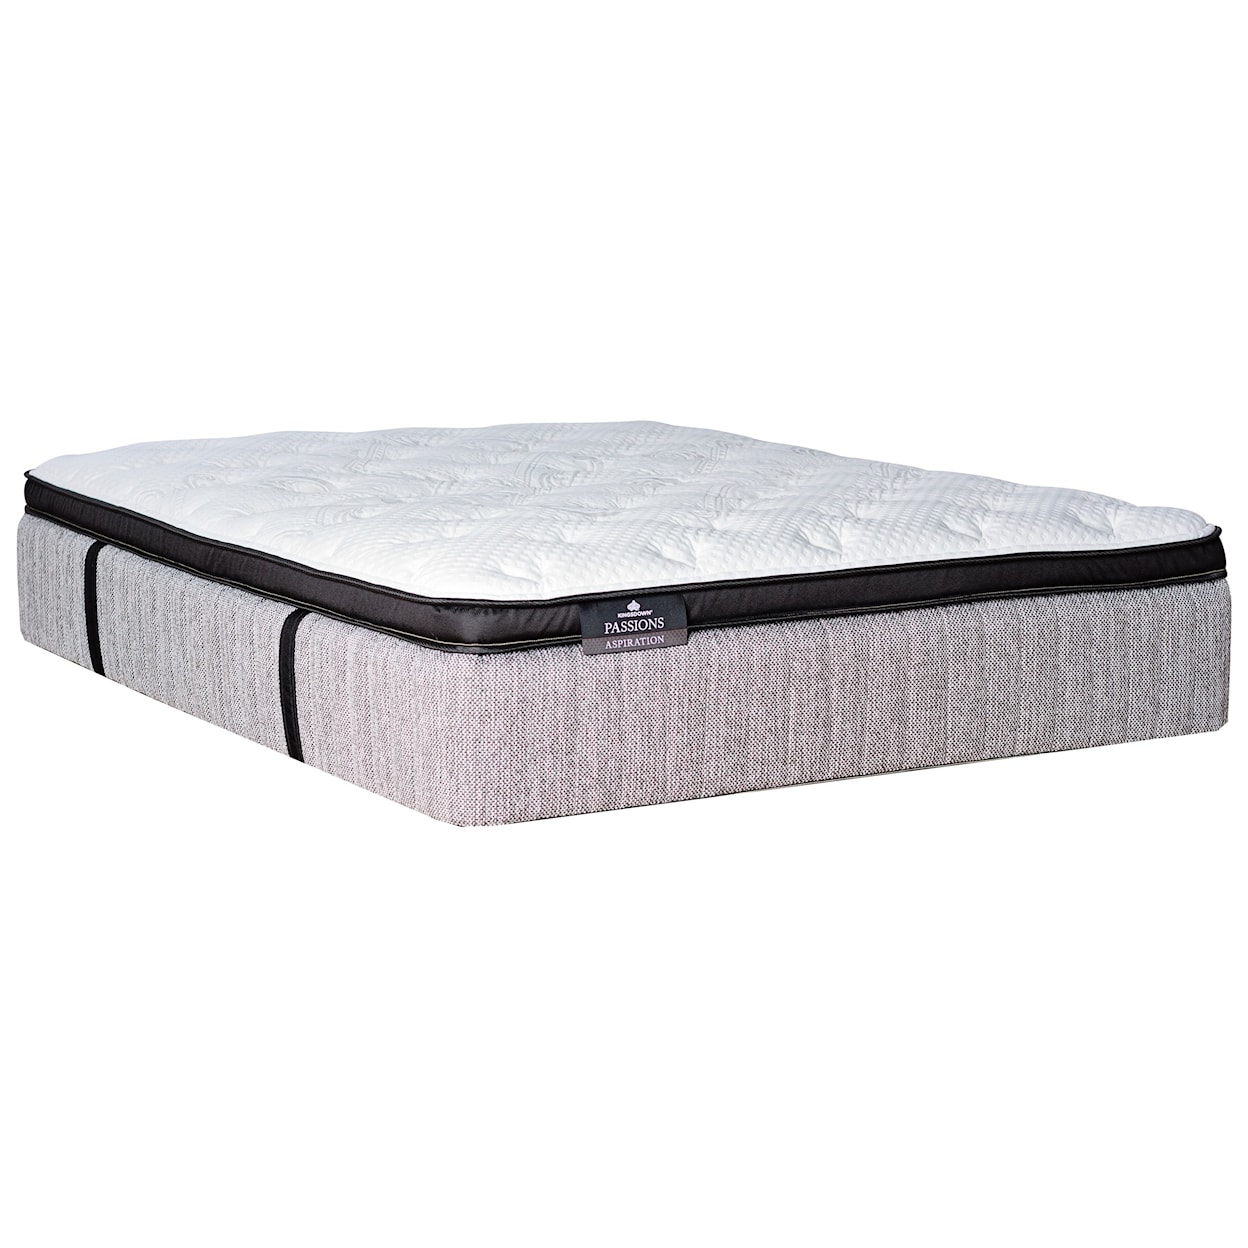 Kingsdown Passions Aspiration Pillow Top King Pillow Top Pocketed Coil Mattress